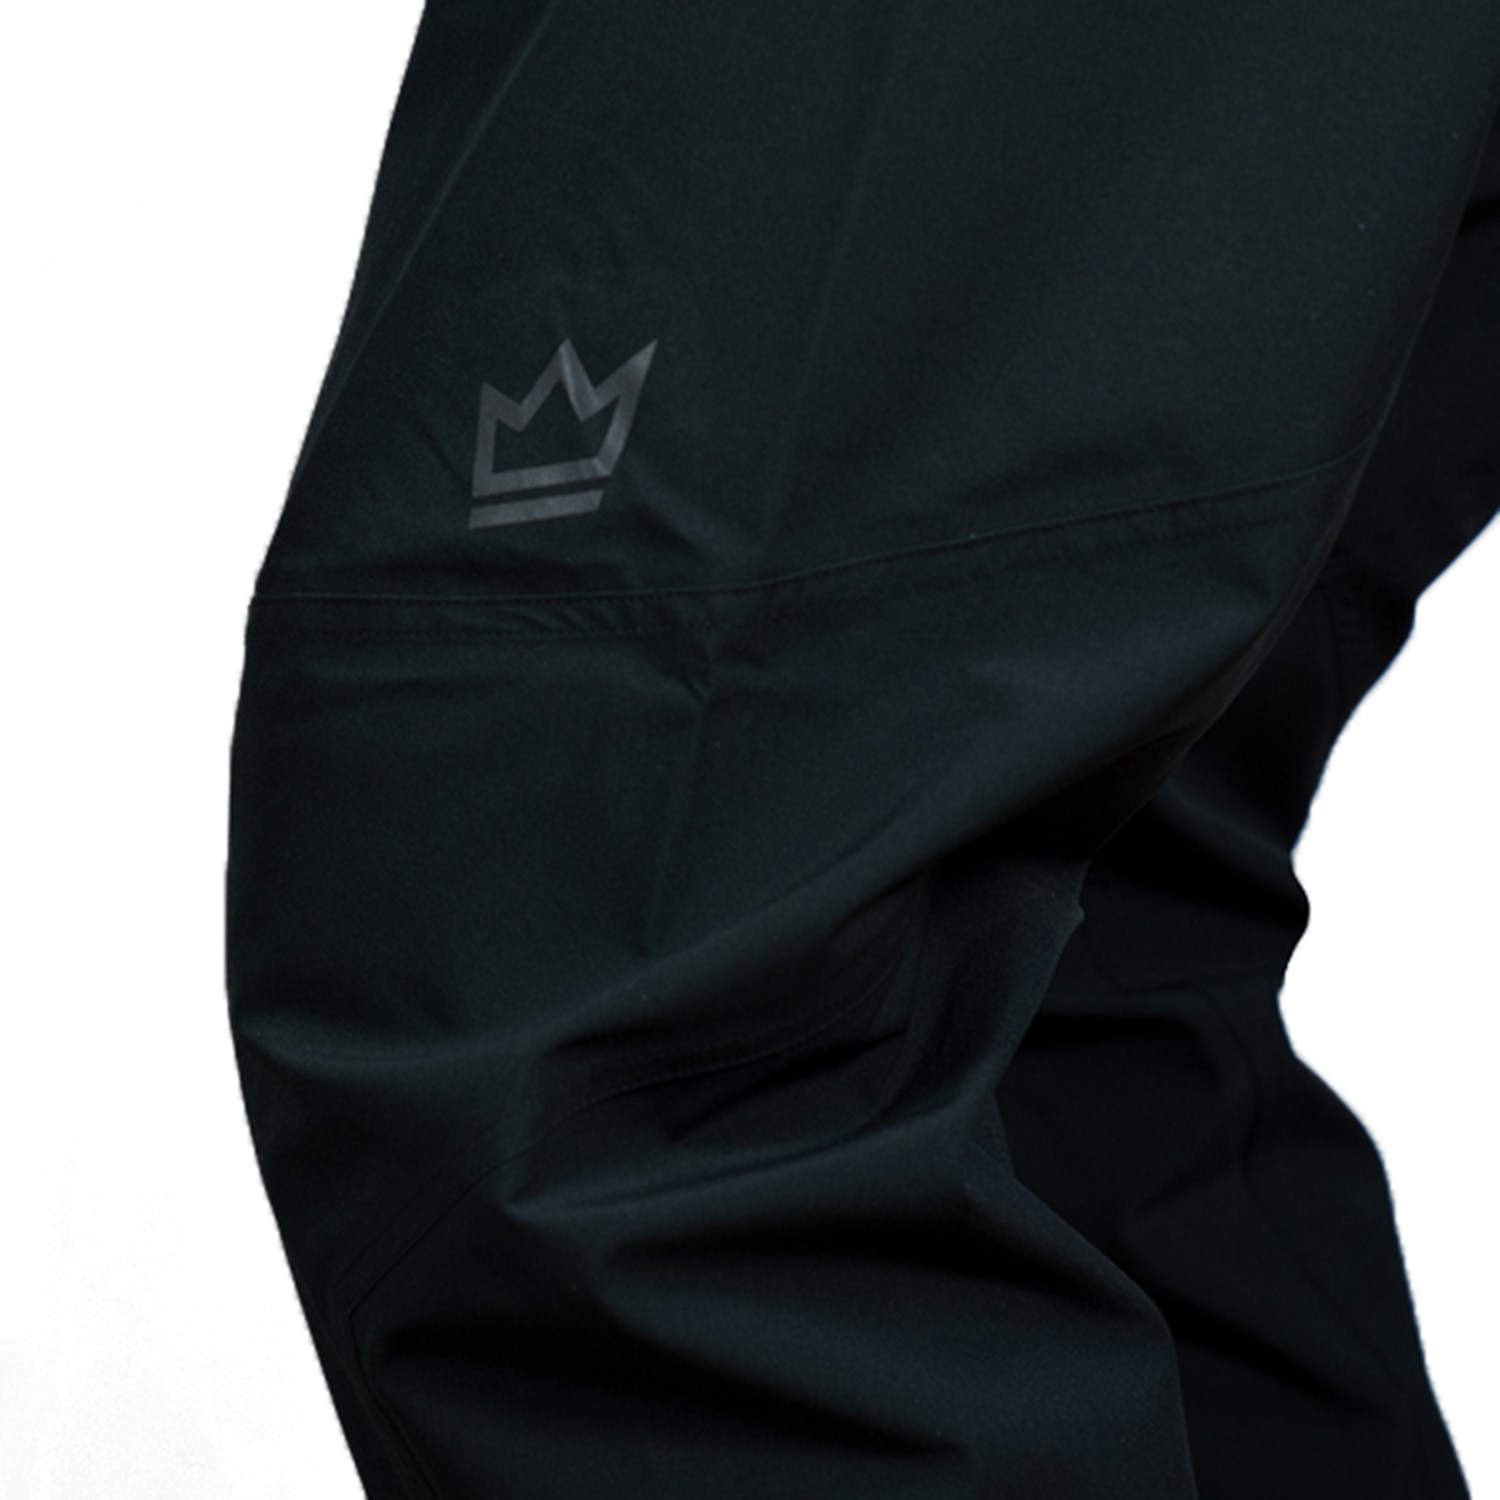 Discover more than 85 royal racing storm pants best - in.eteachers